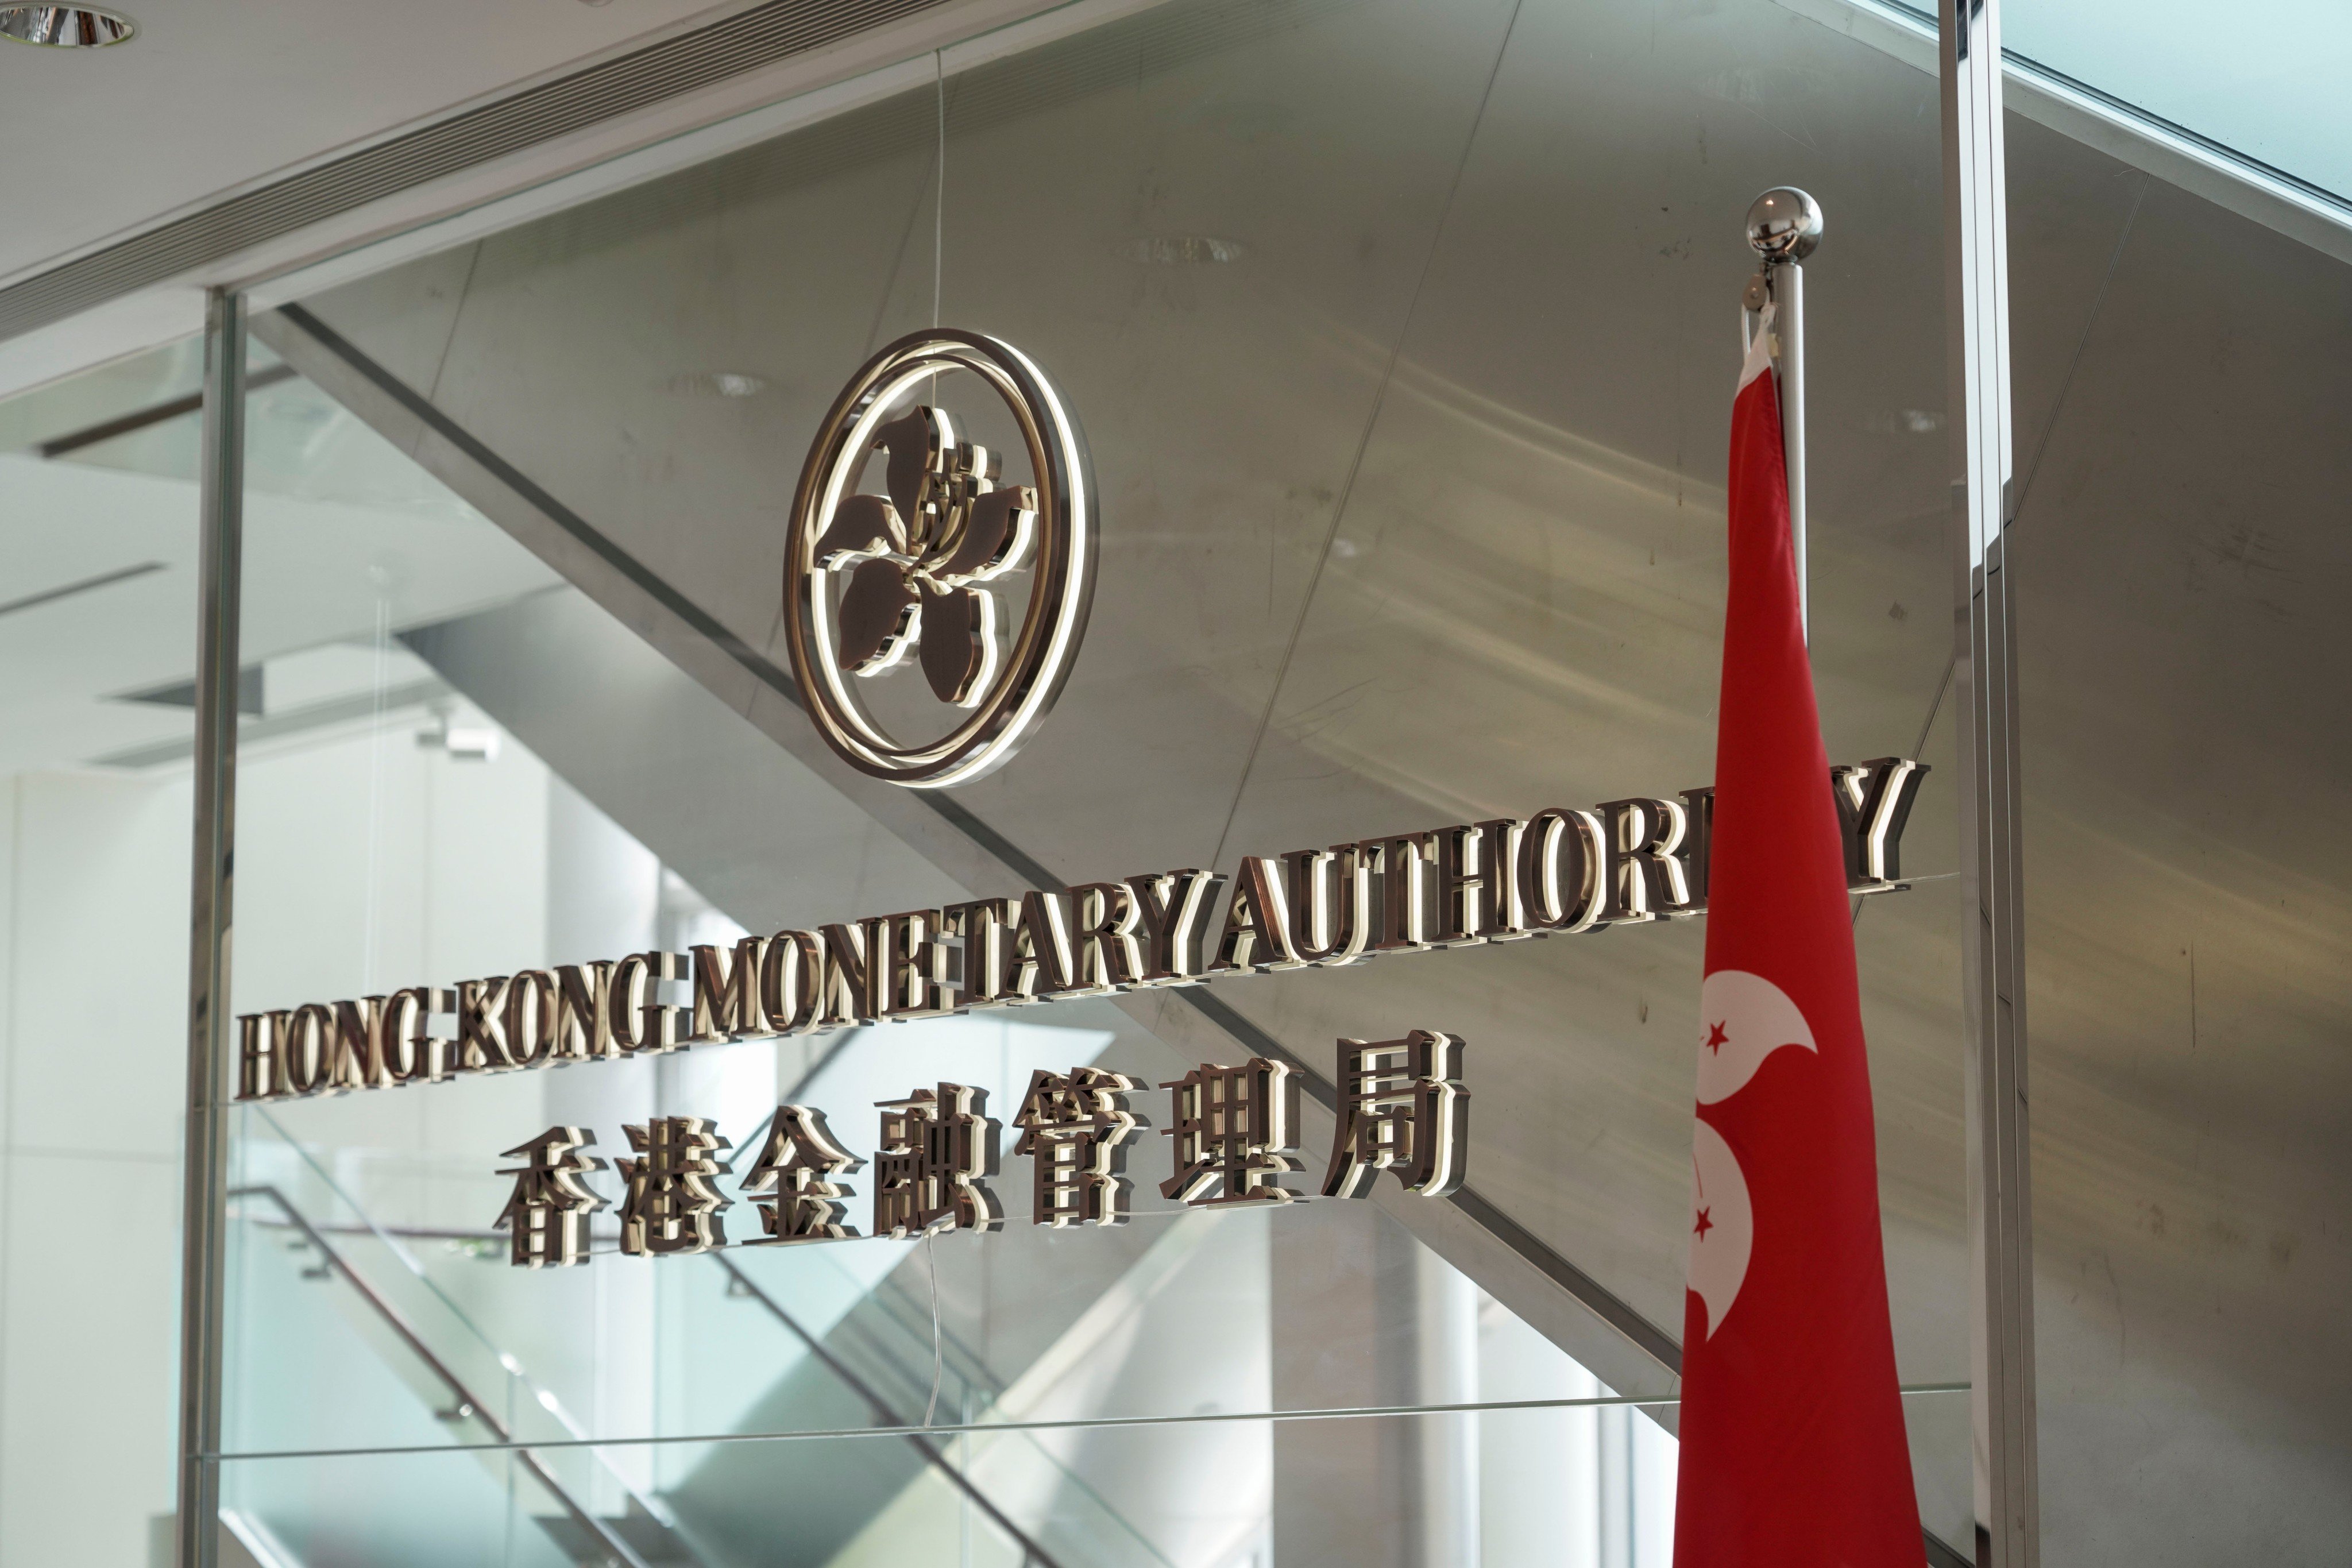 Hong Kong Monetary Authority at the International Financial Centre Building in Central. Photo: Shutterstock